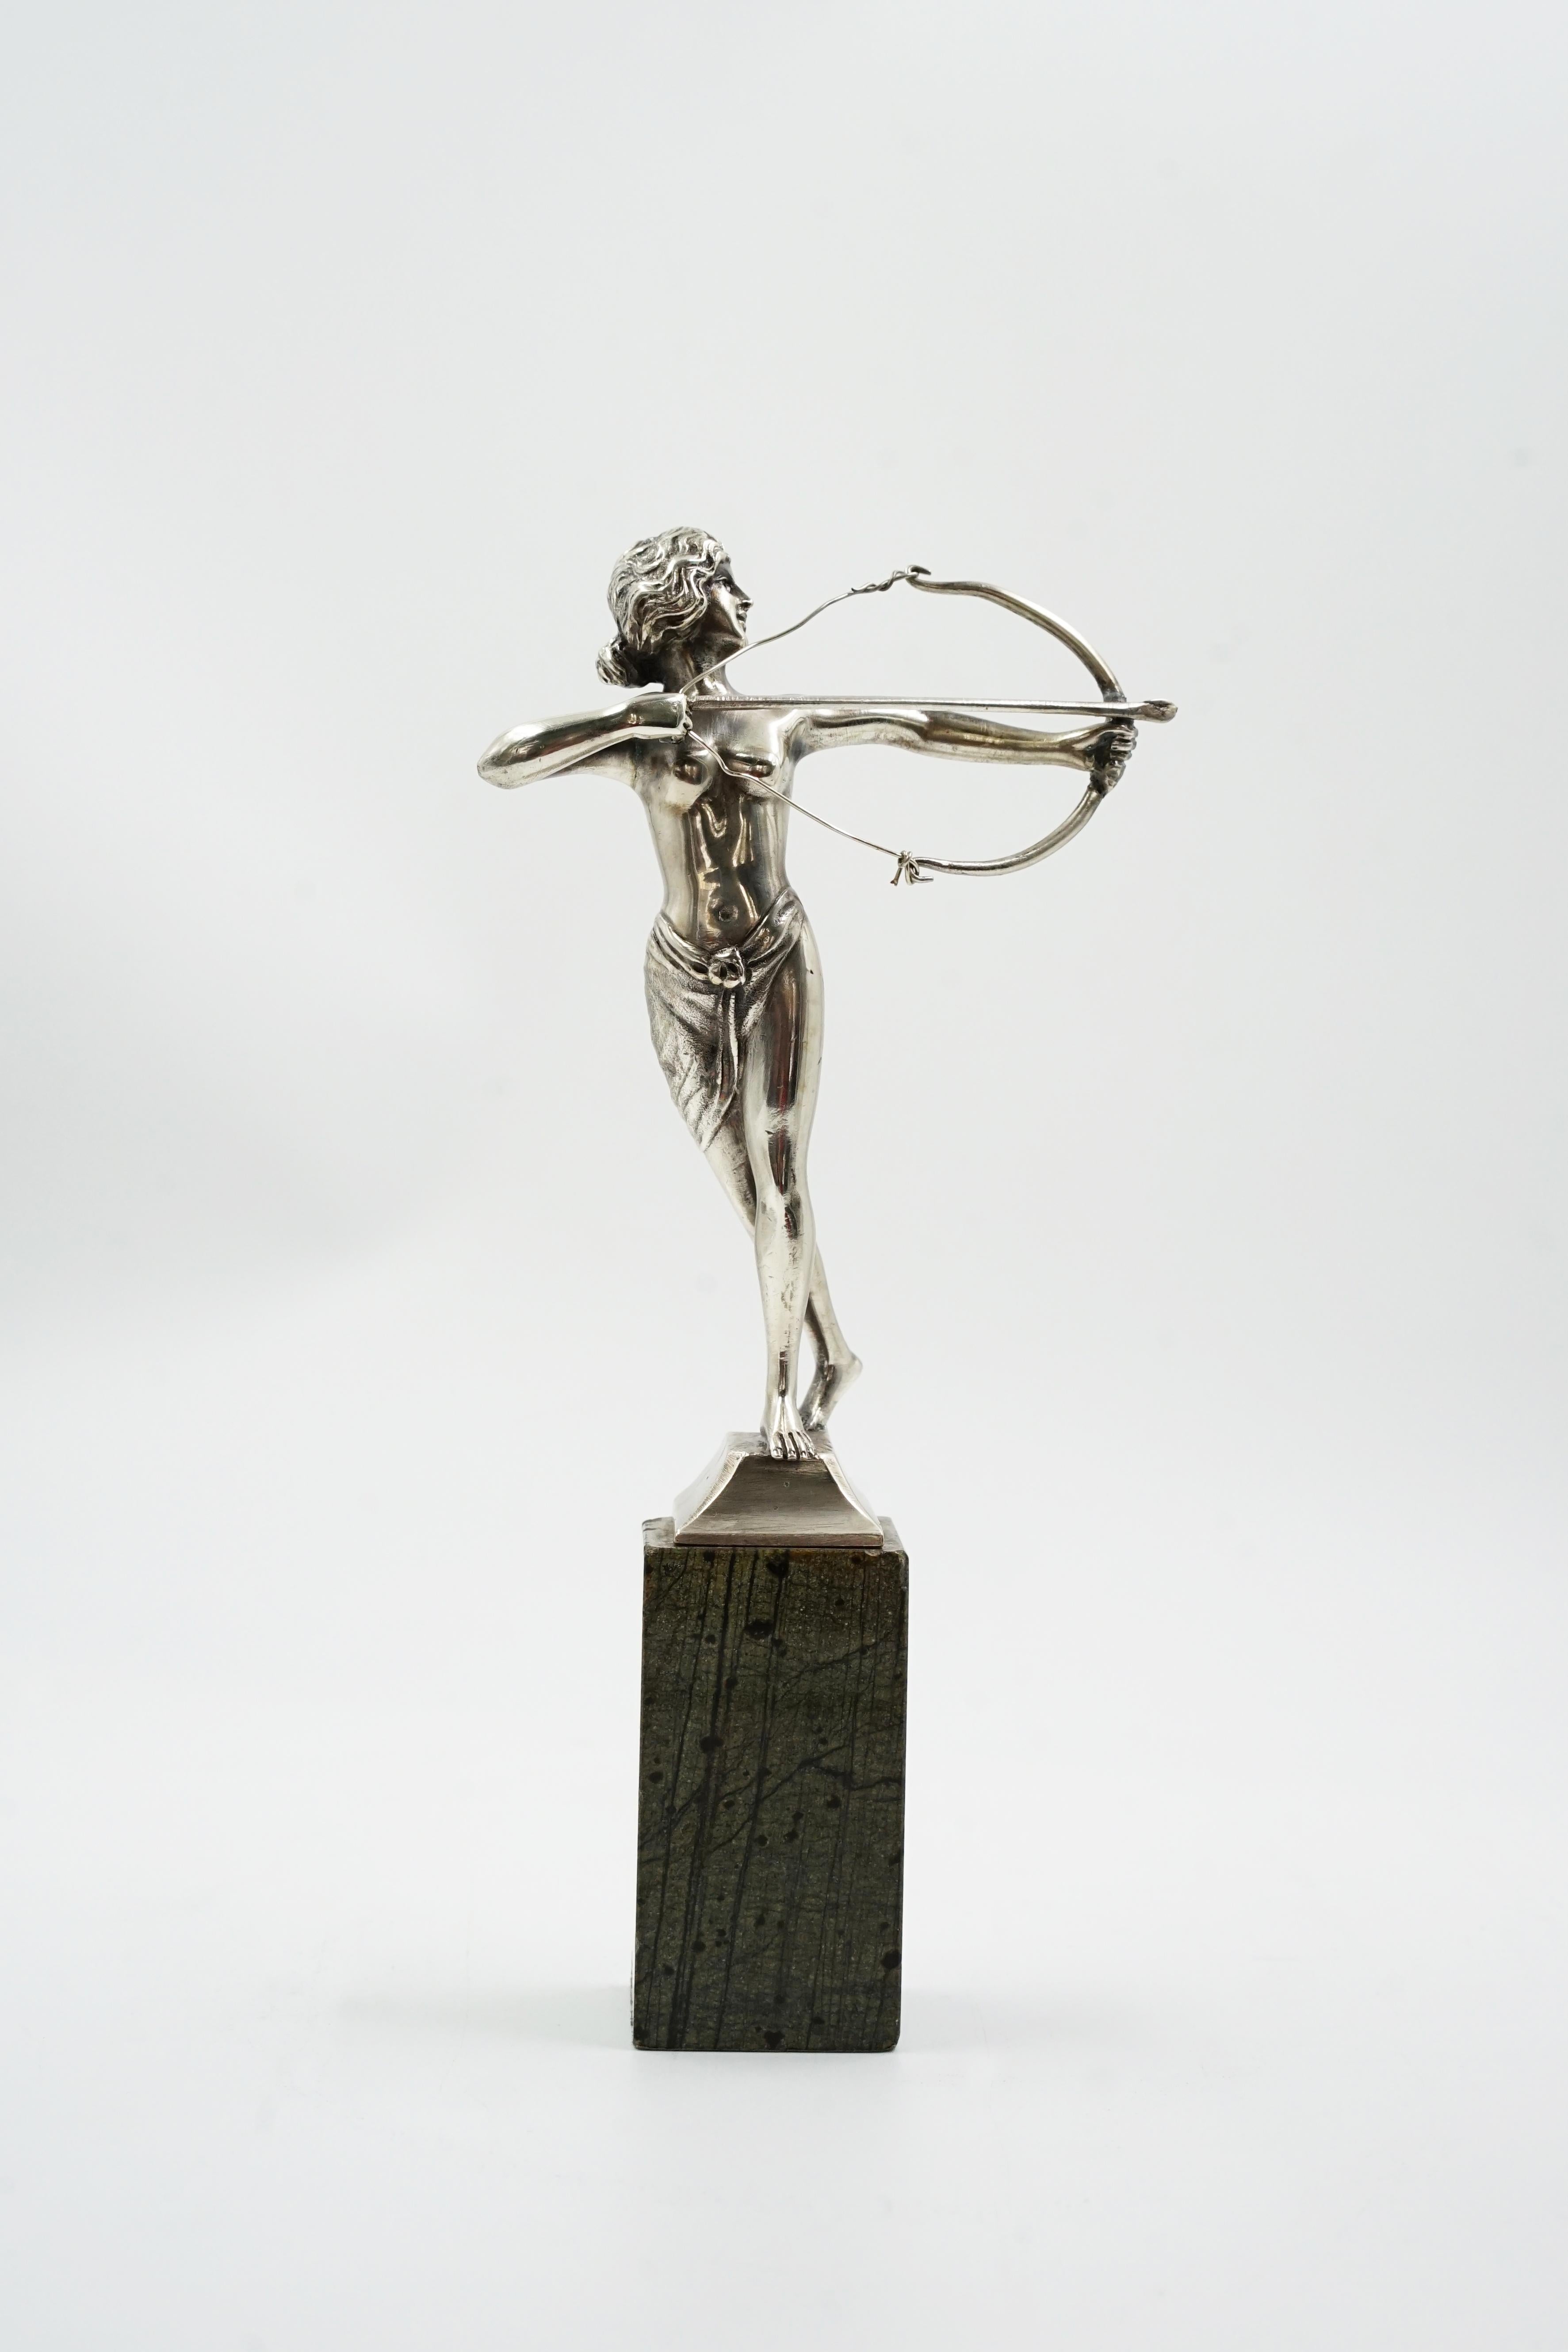 Diana the huntress sculpture Vienna bronze
Bronze with marble base
Origin Austria Circa 1920
The sculpture is in very good condition and its silver patina is also
It has a small repair on the hand that holds the bow.
Very good restoration
Art deco